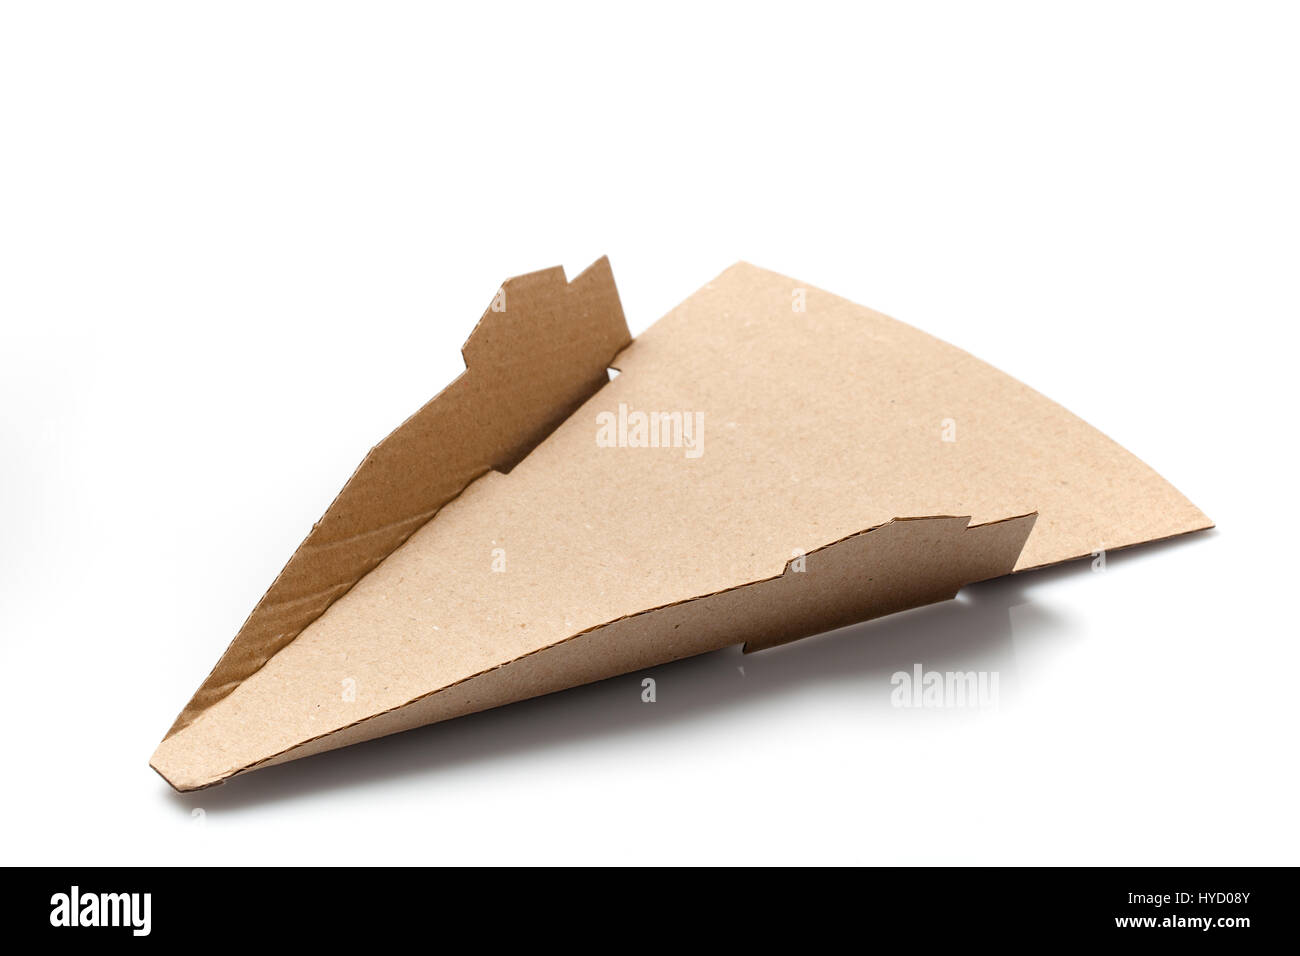 Single cardboard packaging for pizza slice in triangular shape isolated on white. Stock Photo